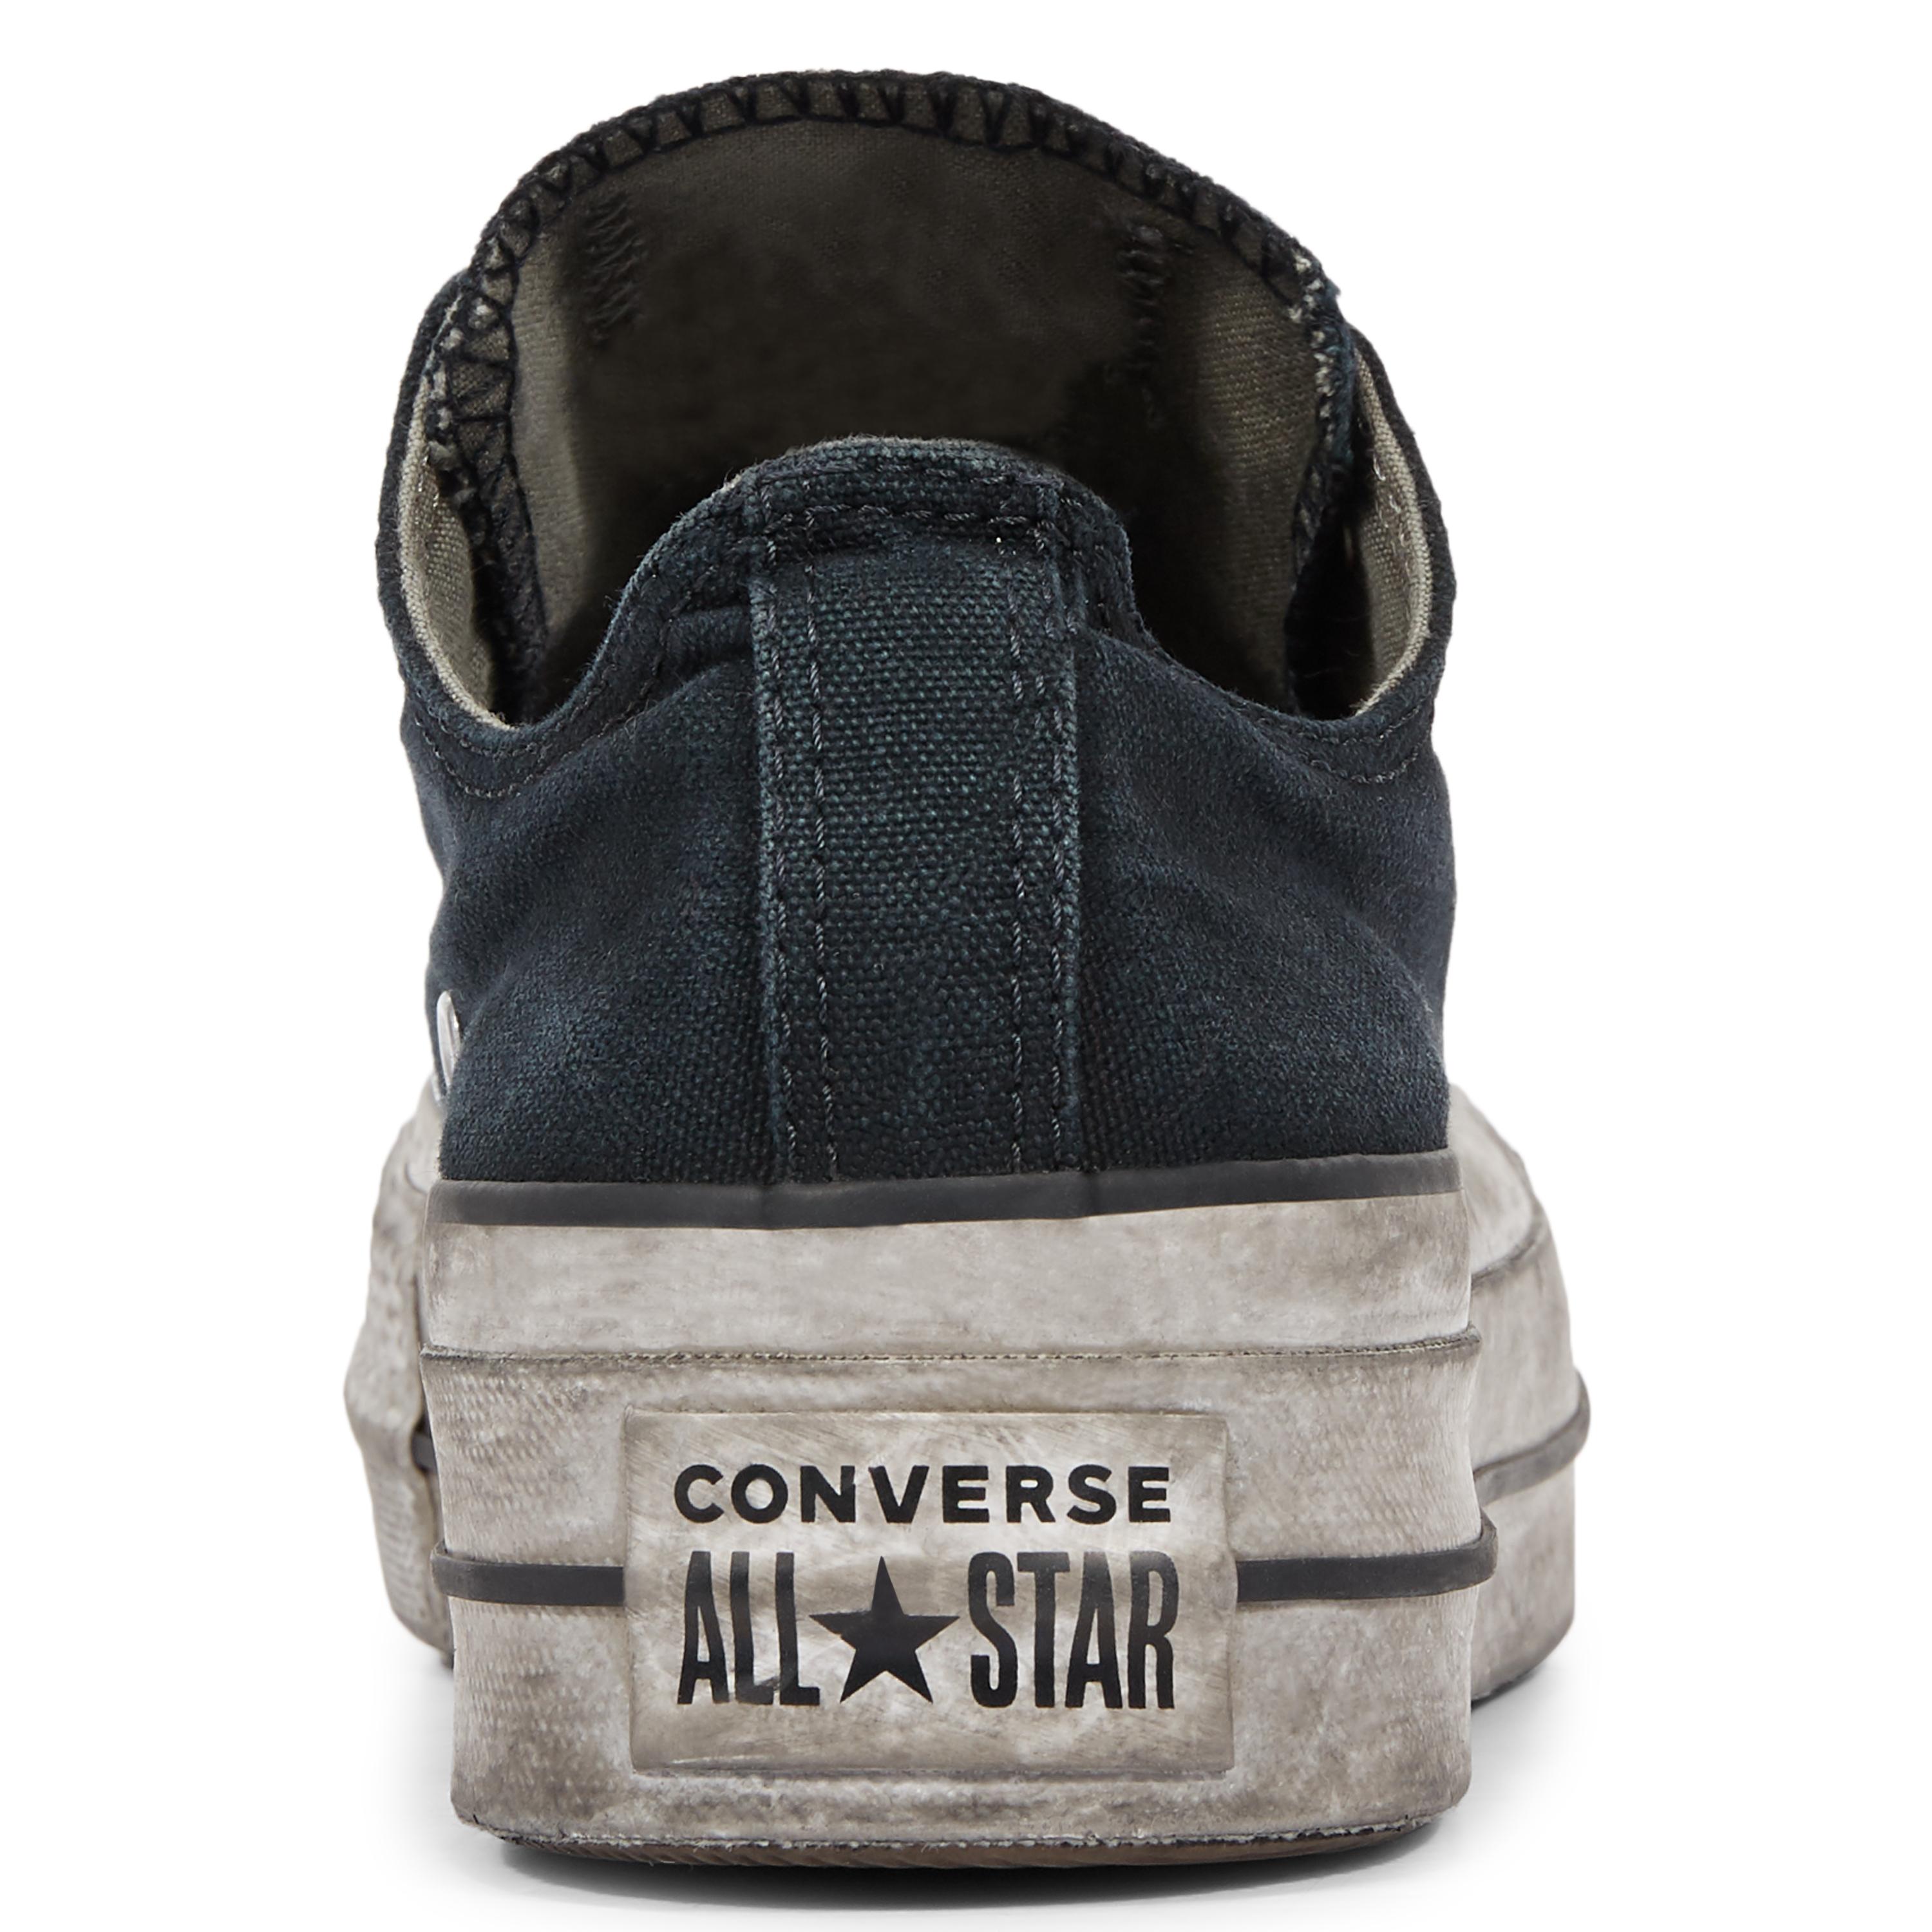 chuck taylor all star lift smoked canvas high top grey